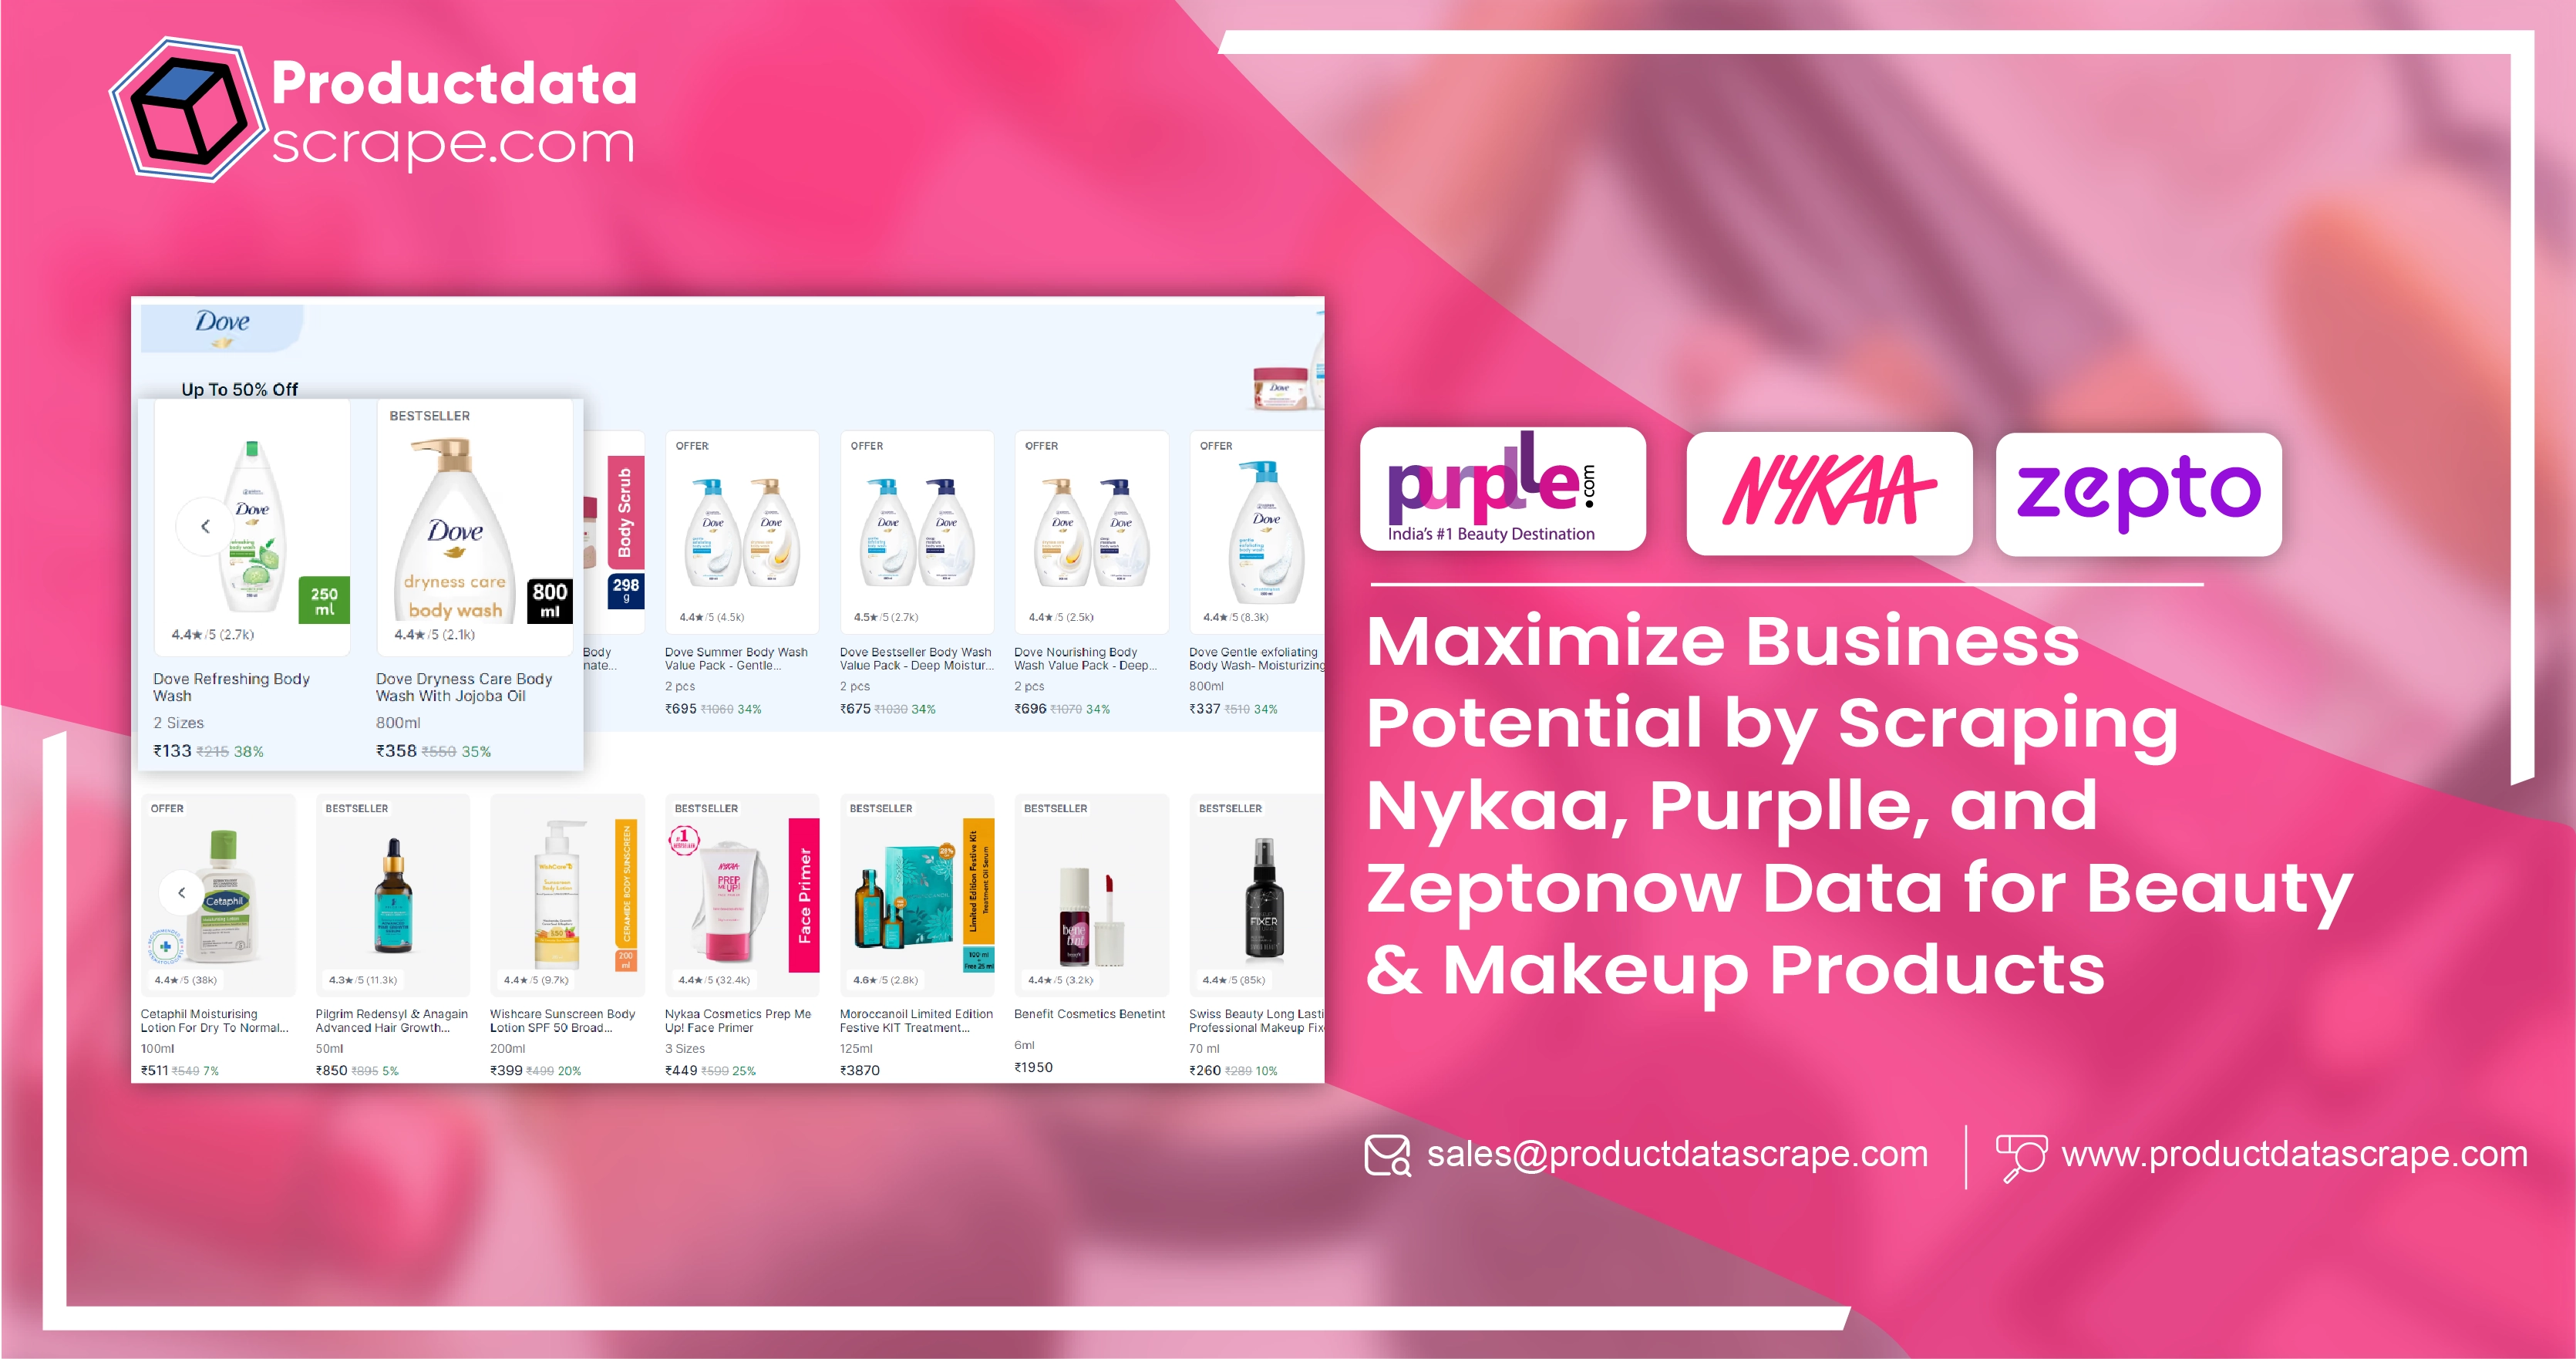 Maximize-Business-Potential-by-Scraping-Nykaa-Purplle-and-Zeptonow-01